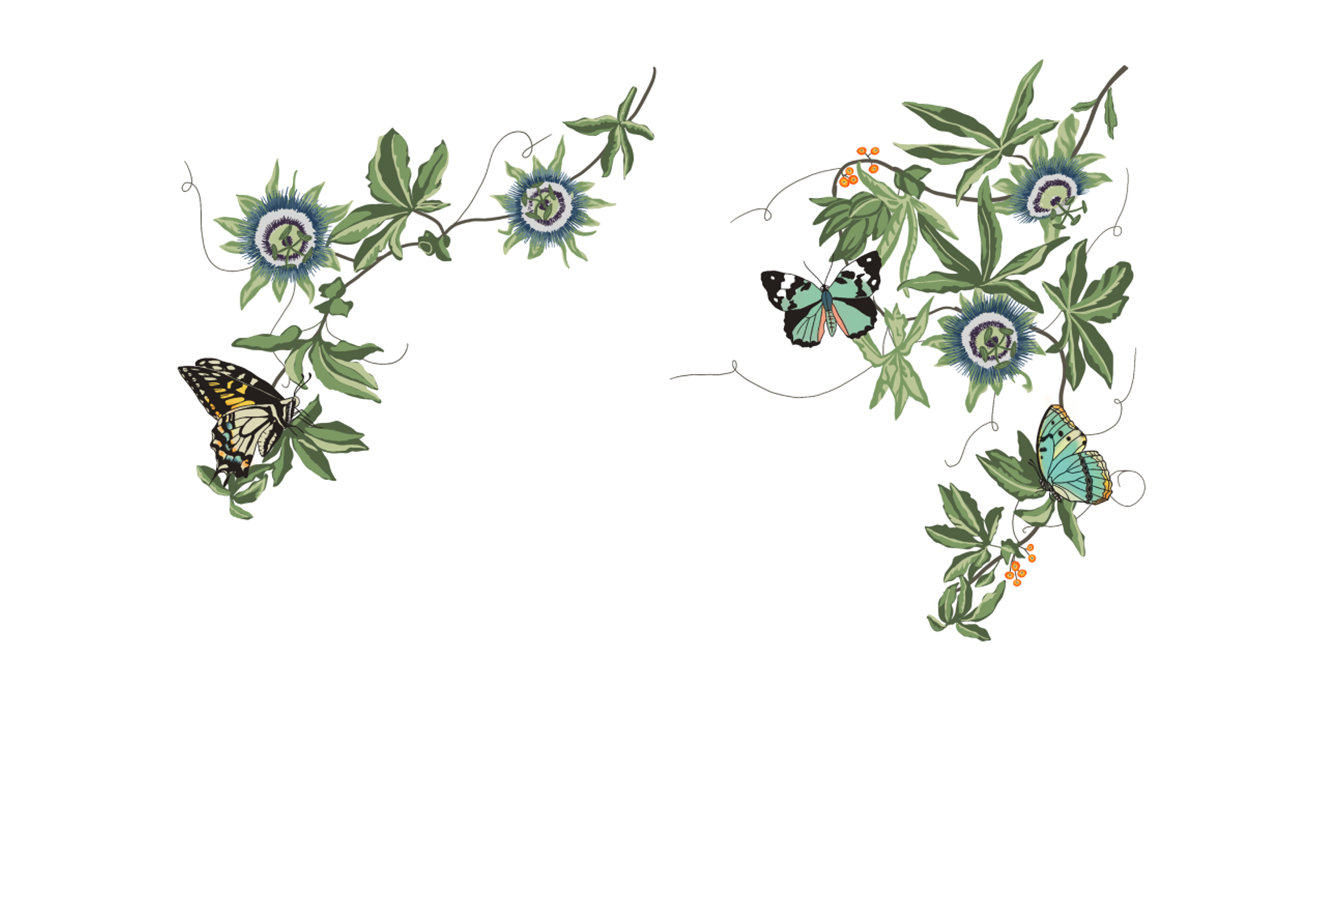 Digital painting of the mural design featuring passion flowers, vines and butterflies, before it would be painted on the front entrance of Lewis Miller Design.